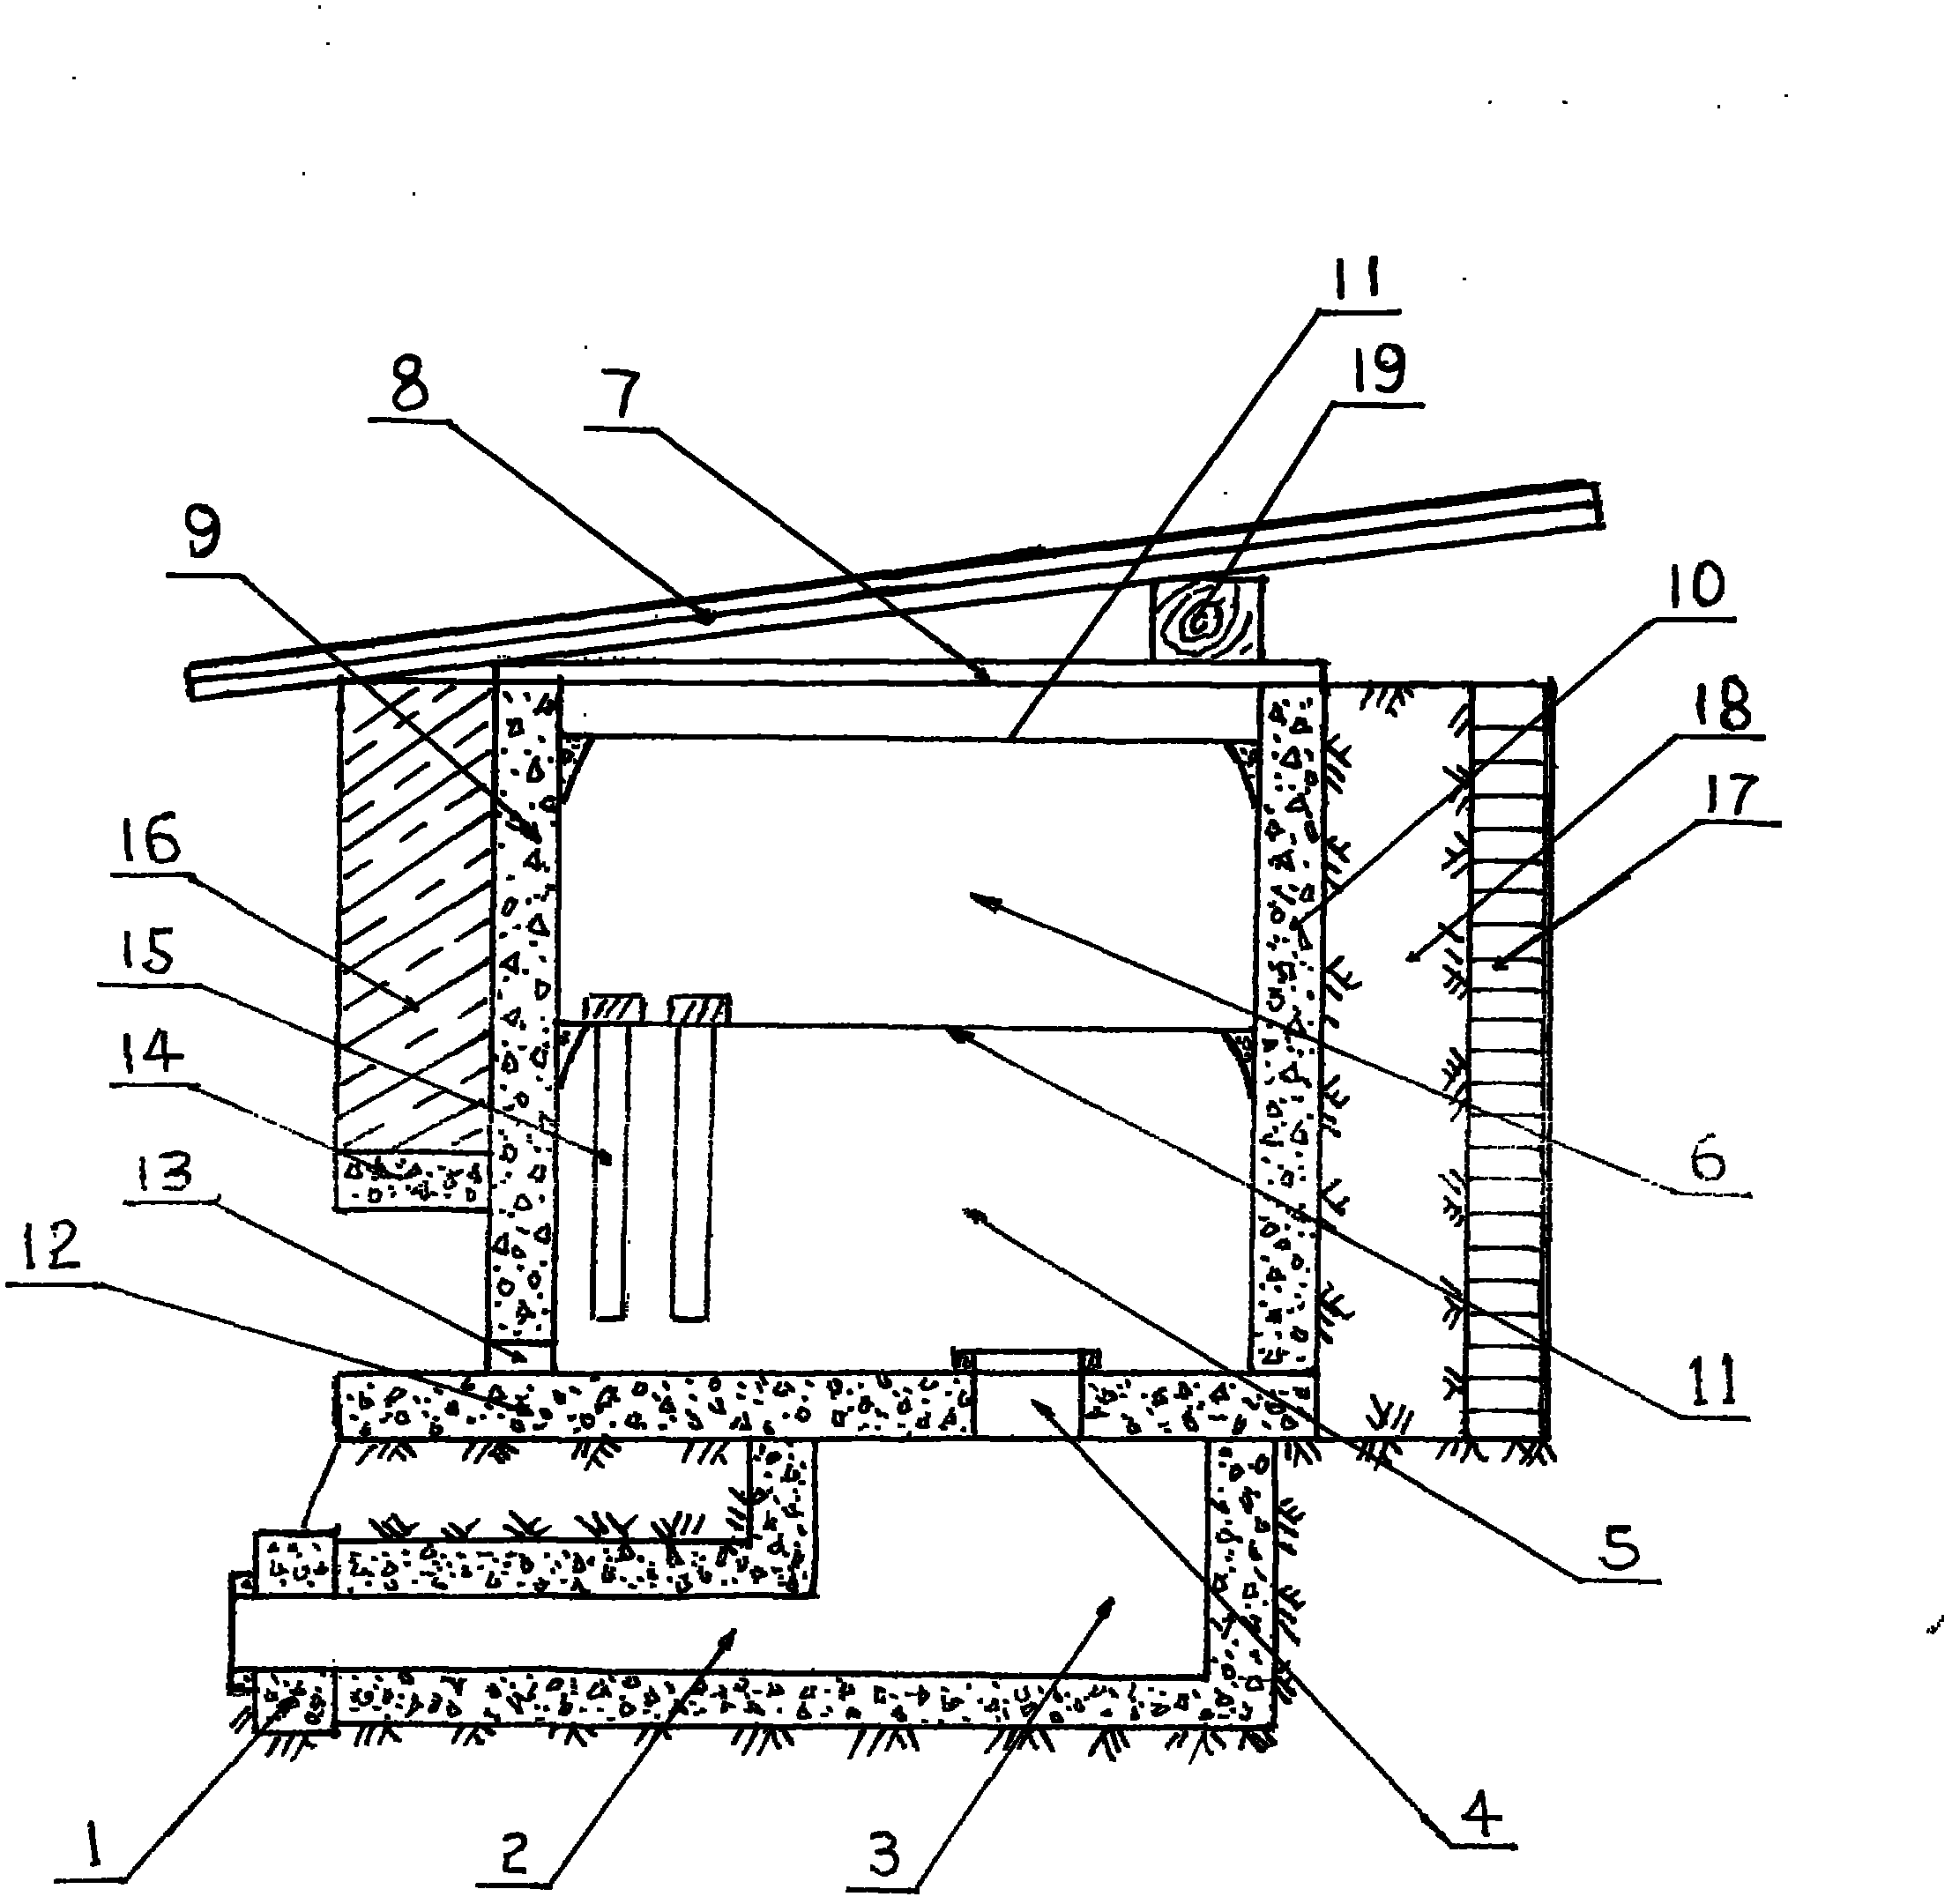 Honeycomb with underground air chamber for ventilation at bottom and die of honeycomb